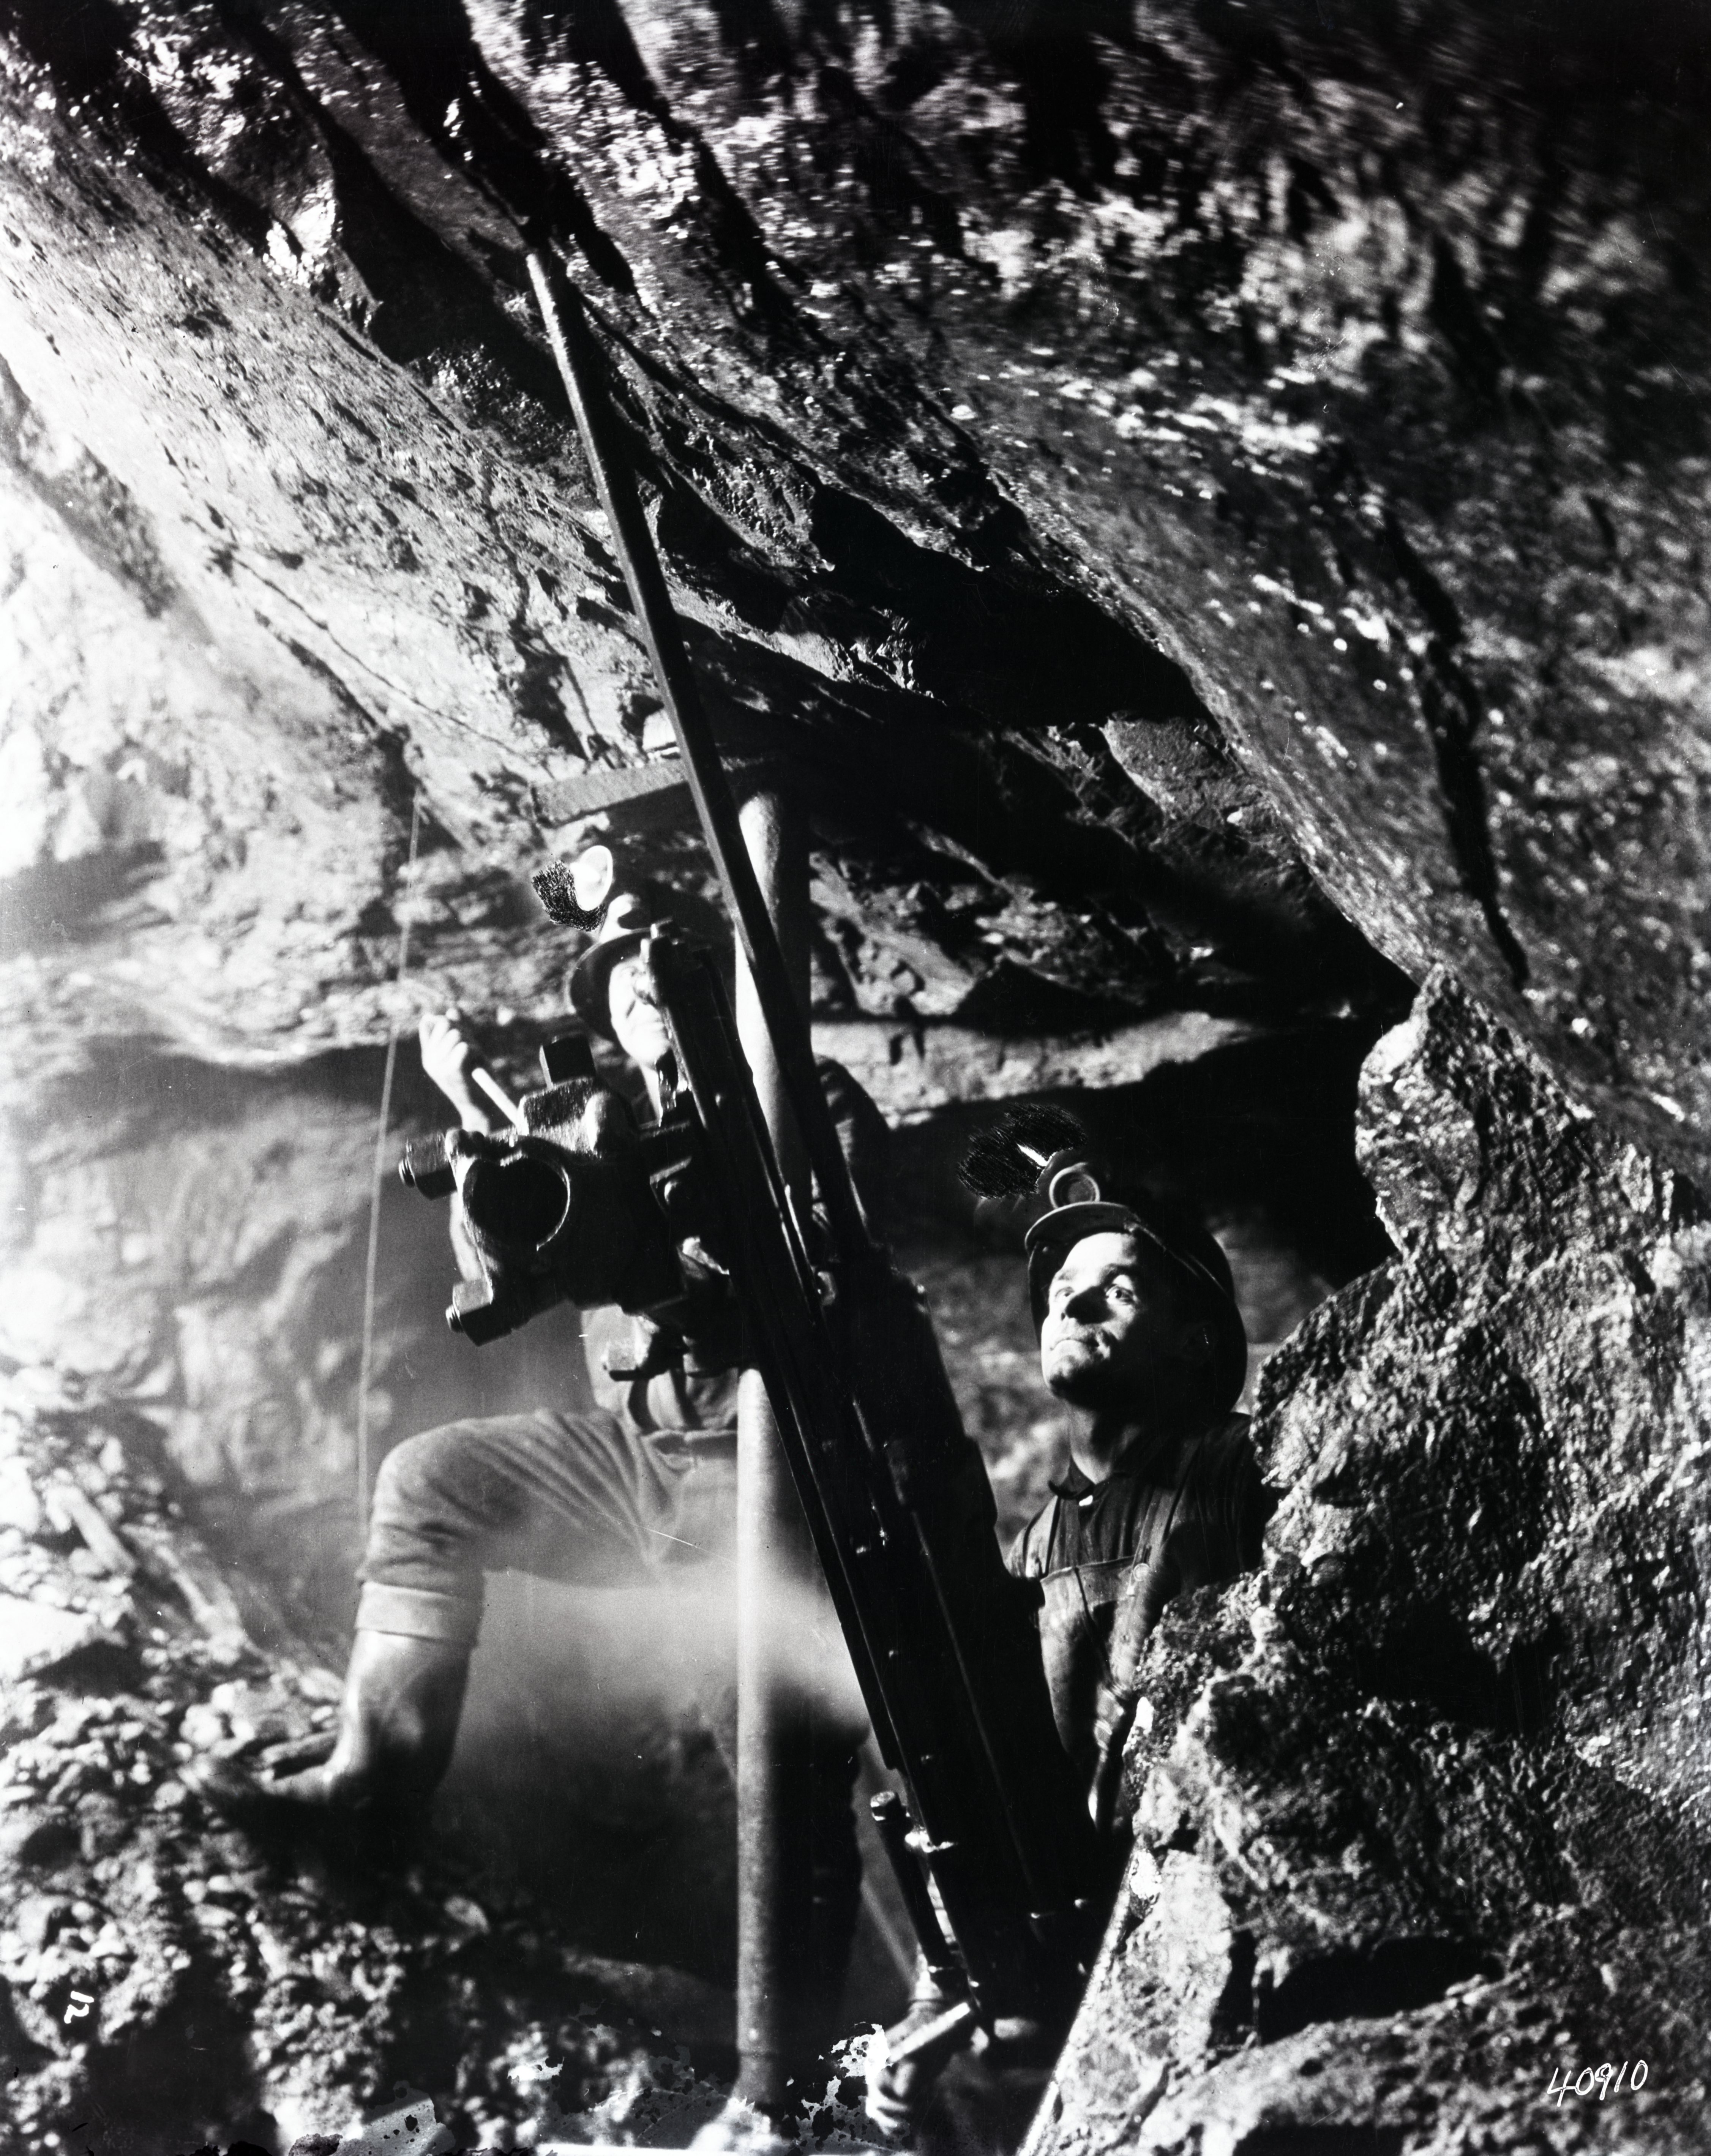 Black-and-white photograph of two miners operating a drill mounted to the ground and roof with metal rods. The men wear rubber boots and a helmet with a light.